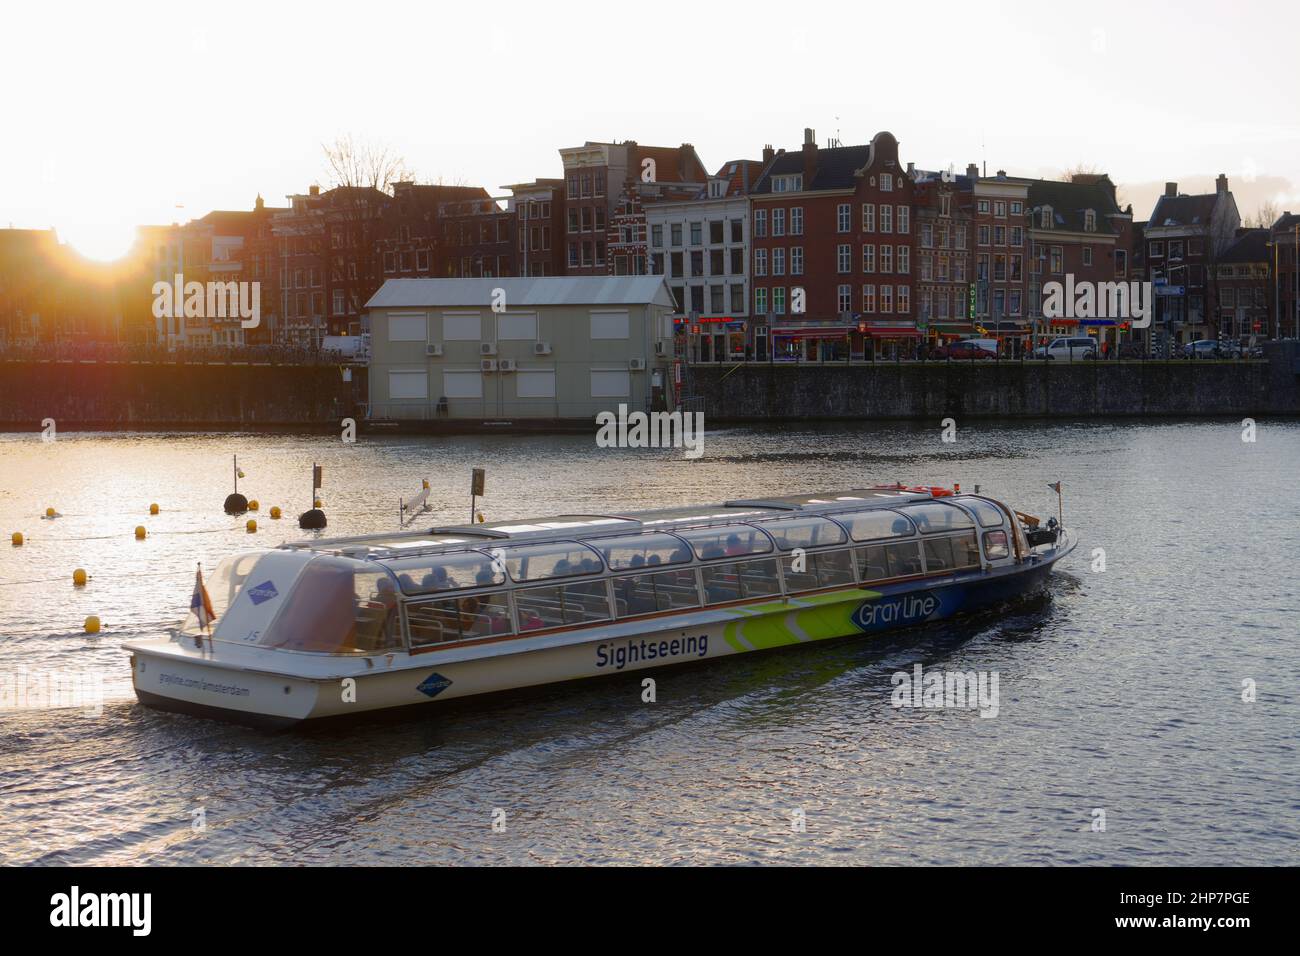 Sightseeing boat in winter Amsterdam, Netherlands Stock Photo